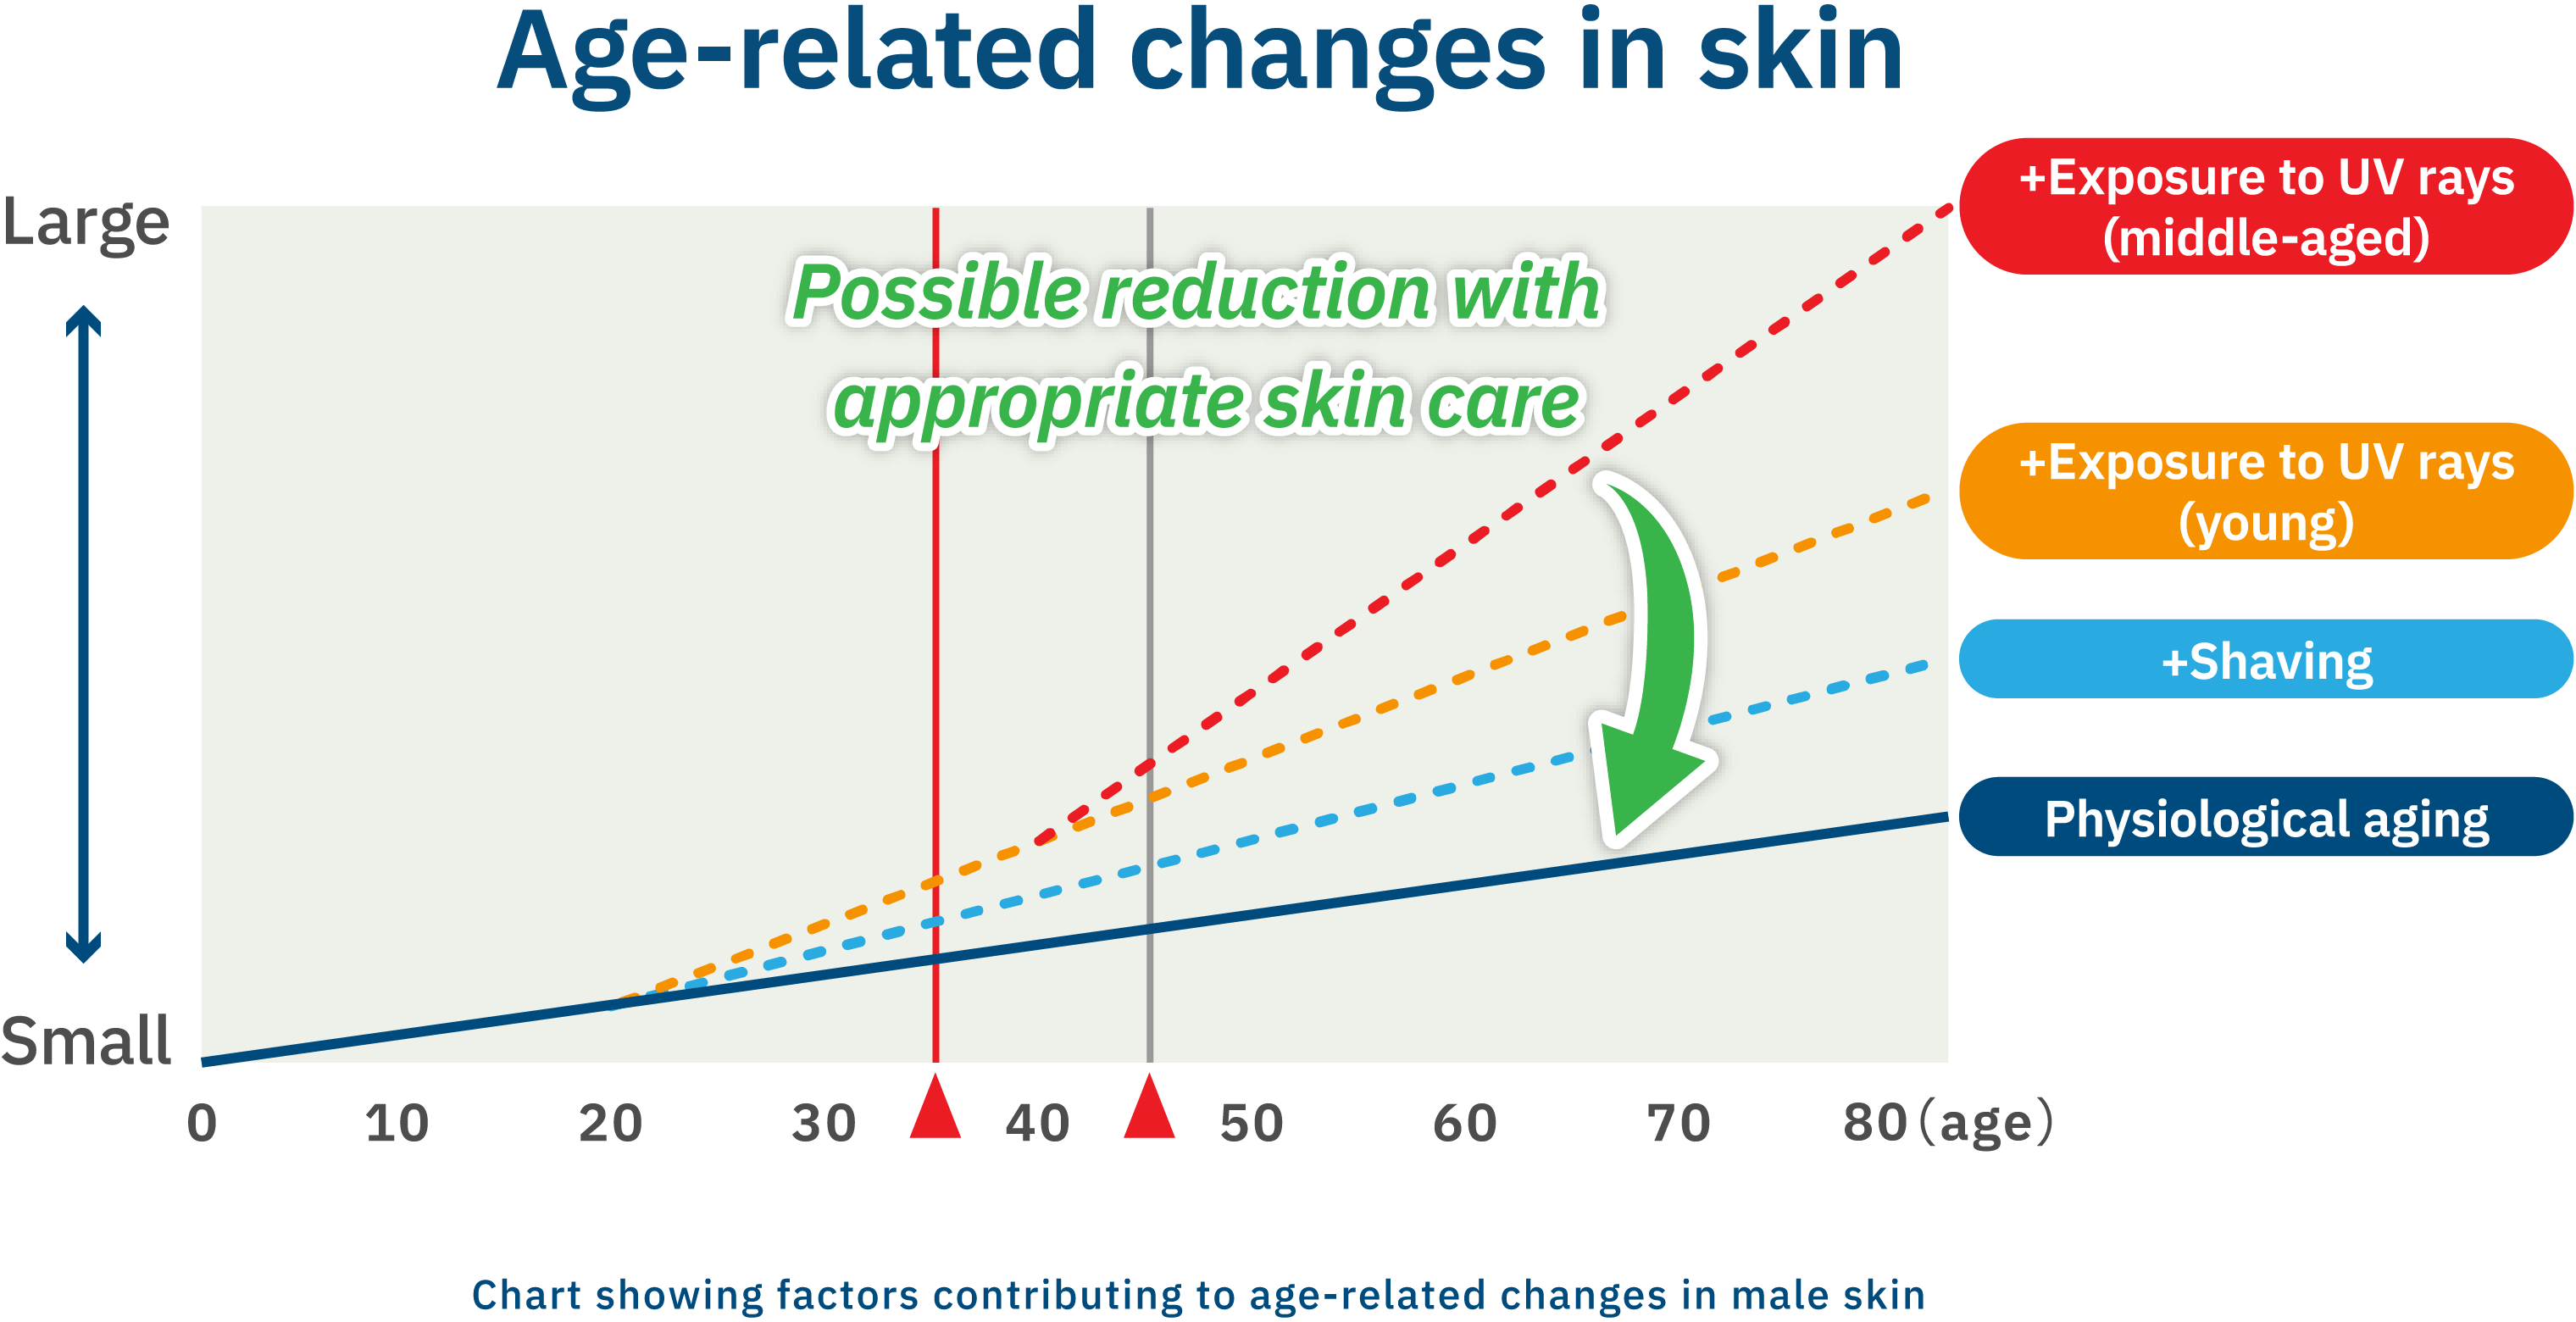 Chart showing factors contributing to age-related changes in male skin